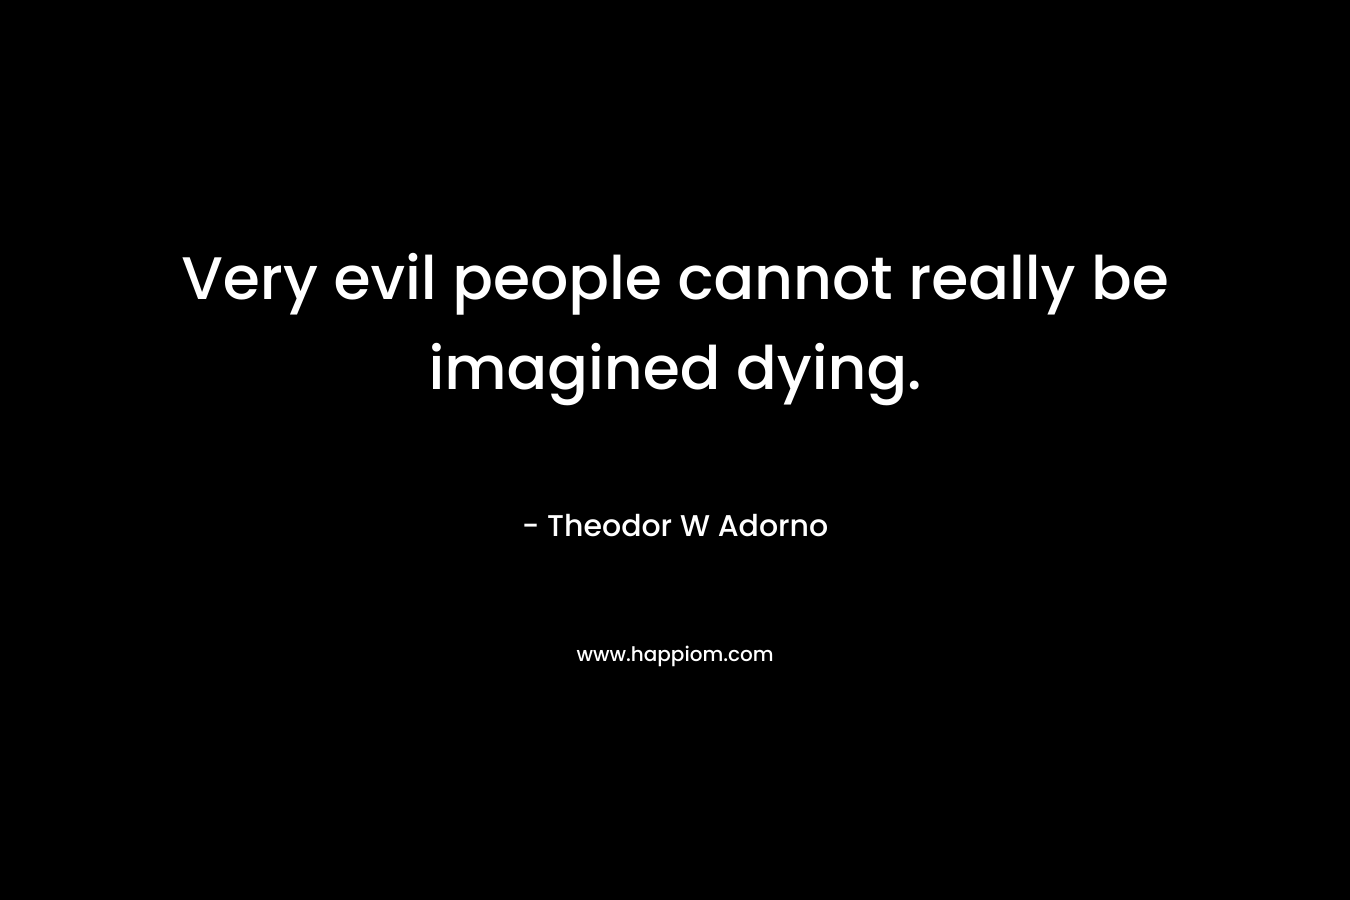 Very evil people cannot really be imagined dying. – Theodor W Adorno